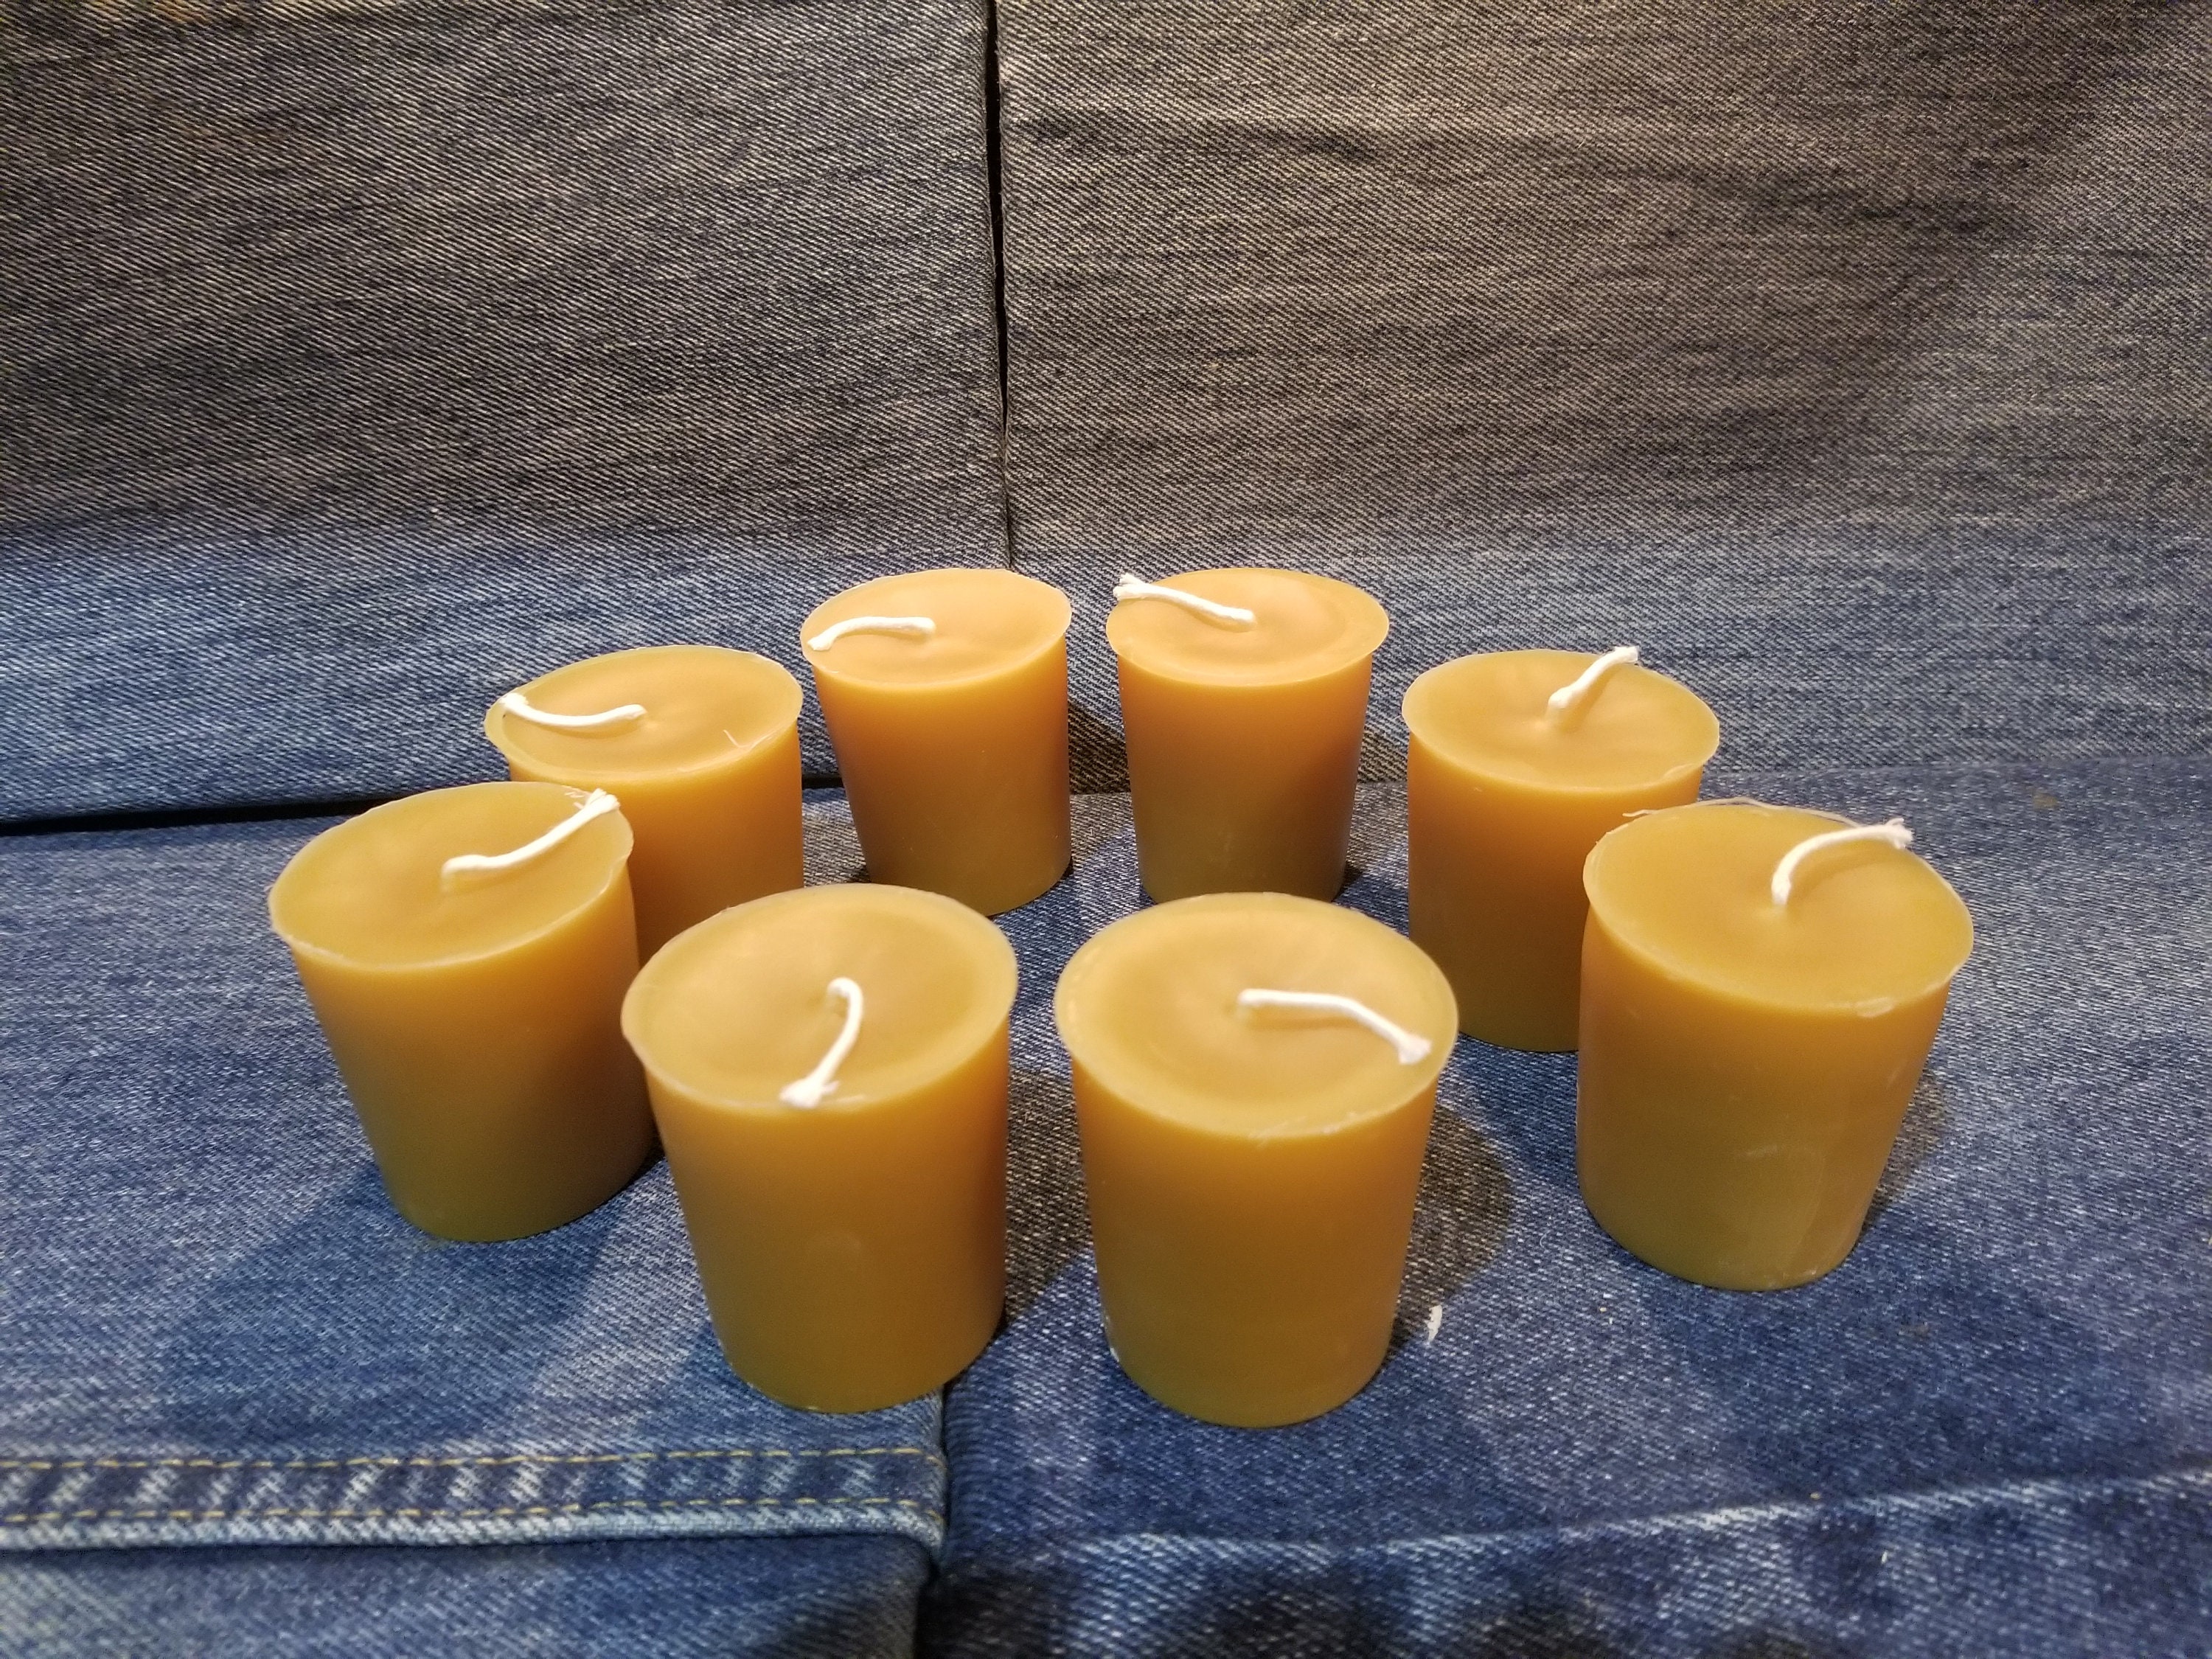 Smokeless Scented Candle Column Wax Aromatic Candles Emergency Lighting  Church Birthday Scented Buddhist Church Party